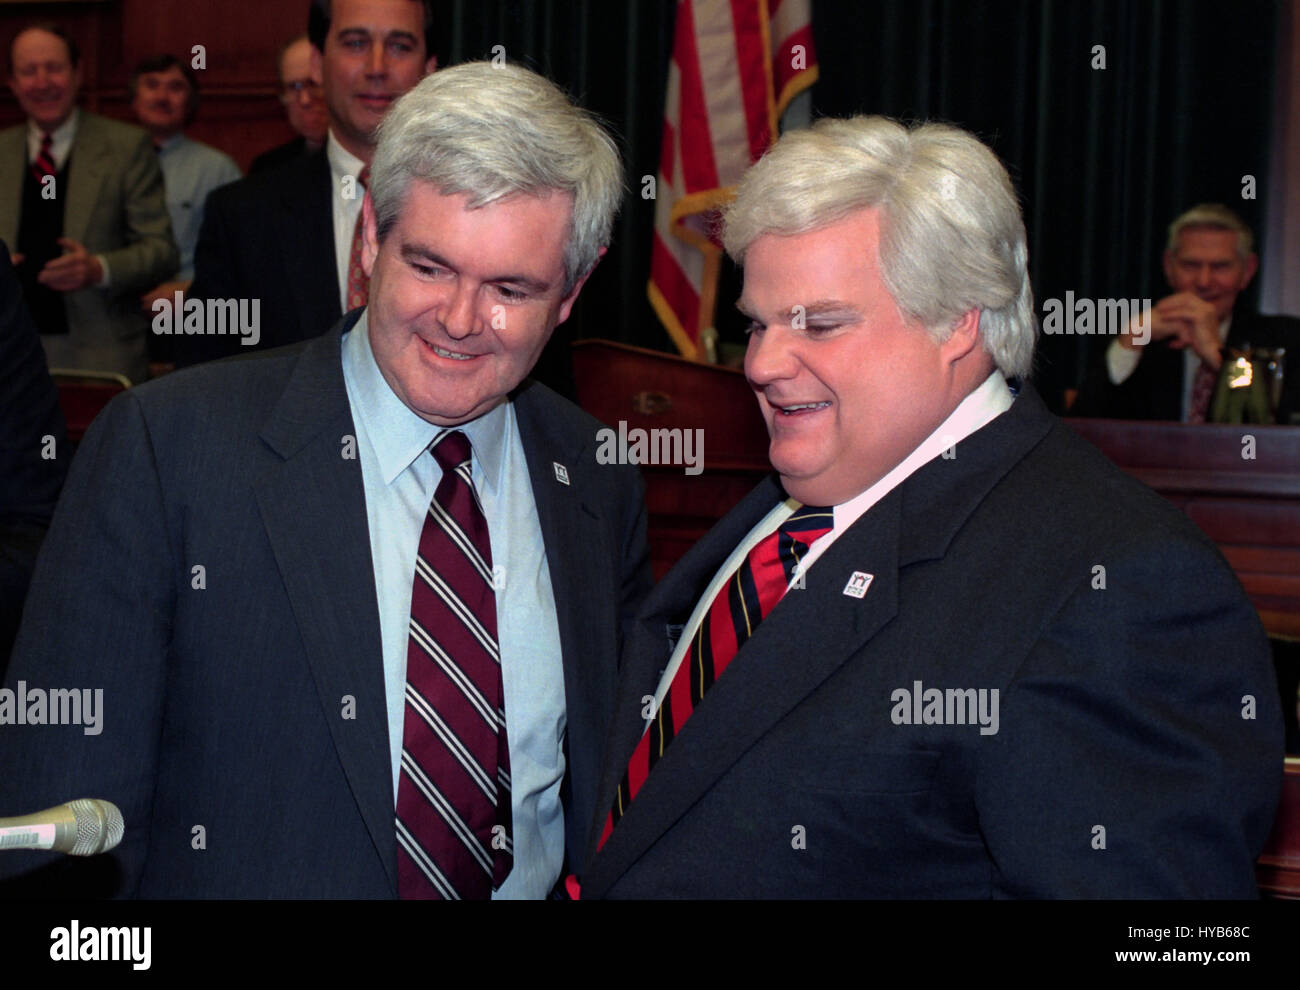 U.S House Speaker Newt Gingrich, left, meets comedian Chris Farley who impersonates Gingrich on the television show Saturday Night Live during an even on Capitol Hill April 4, 1995 in Washington, DC. Stock Photo